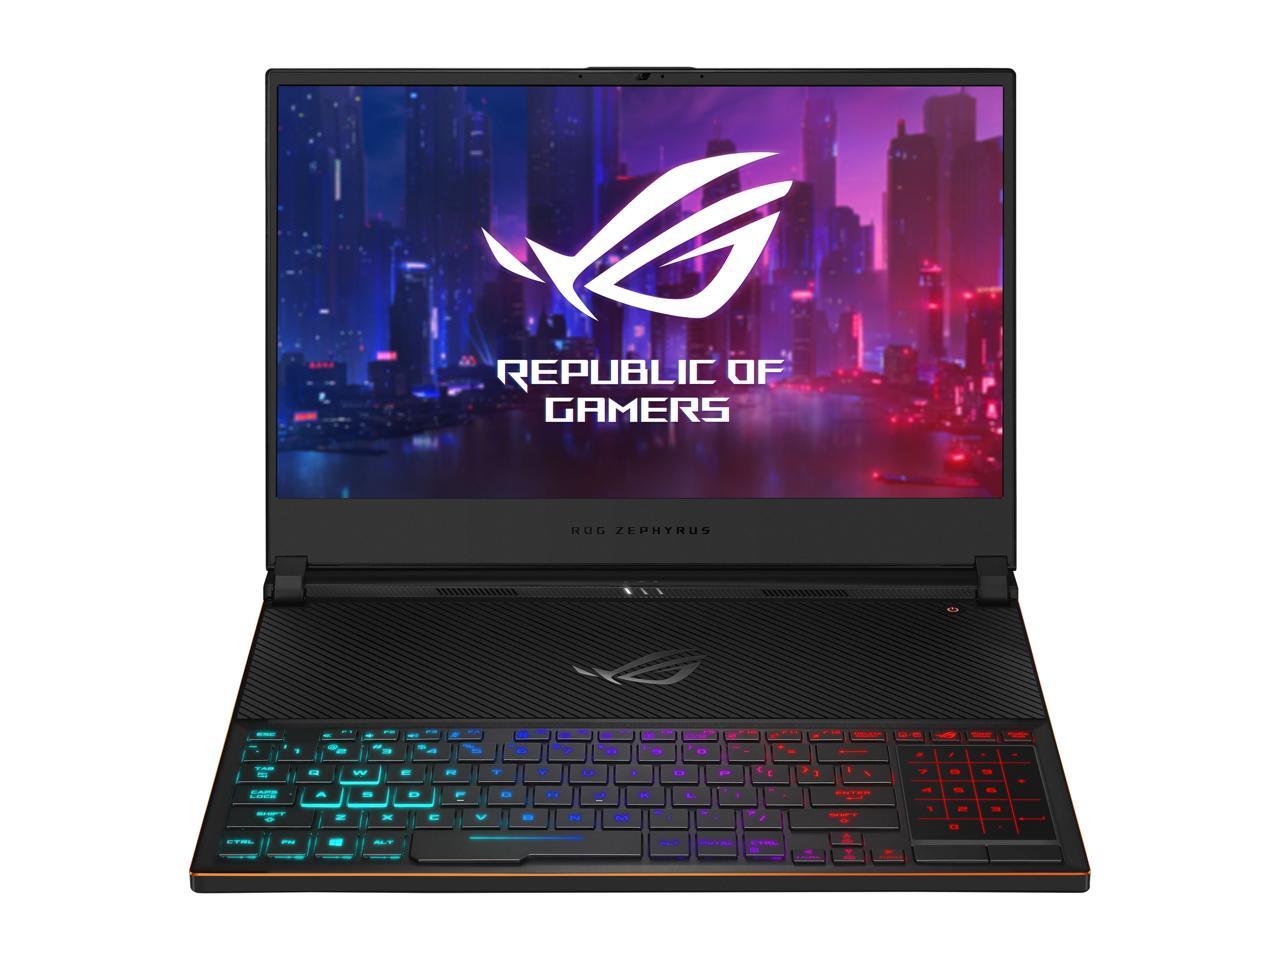 Asus ROG Zephyrus Gaming Laptop With RTX 2080 Max-Q, 144 Hz 